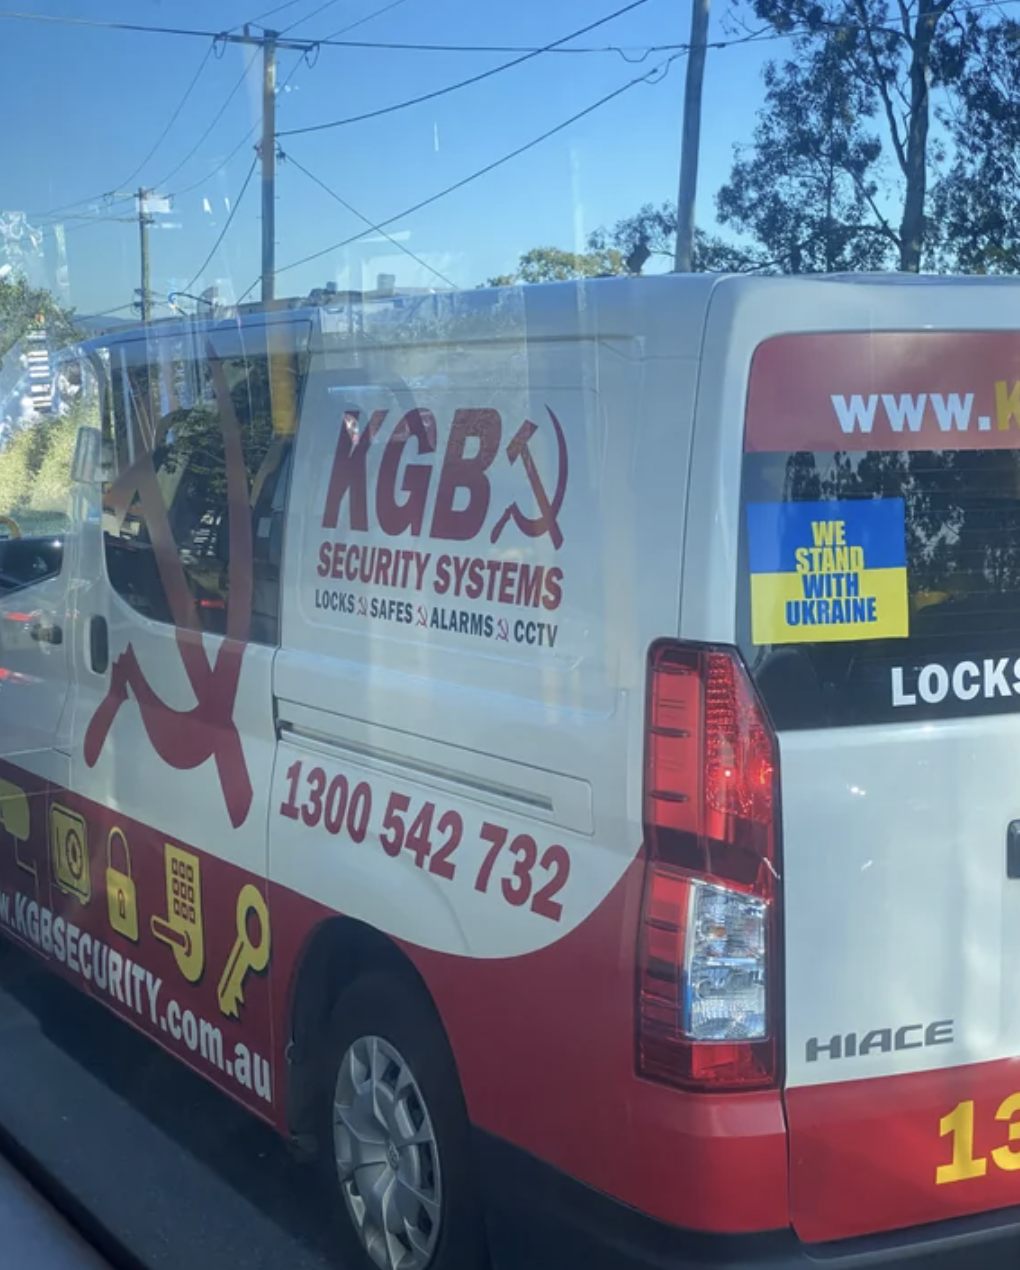 fascinating photos - commercial vehicle - N Kgba Security Systems Locks Safes Alarms Cctv 1300 542 732 Korsecurity.com.au www. We Stand With Ukraine Locks Hiace 13